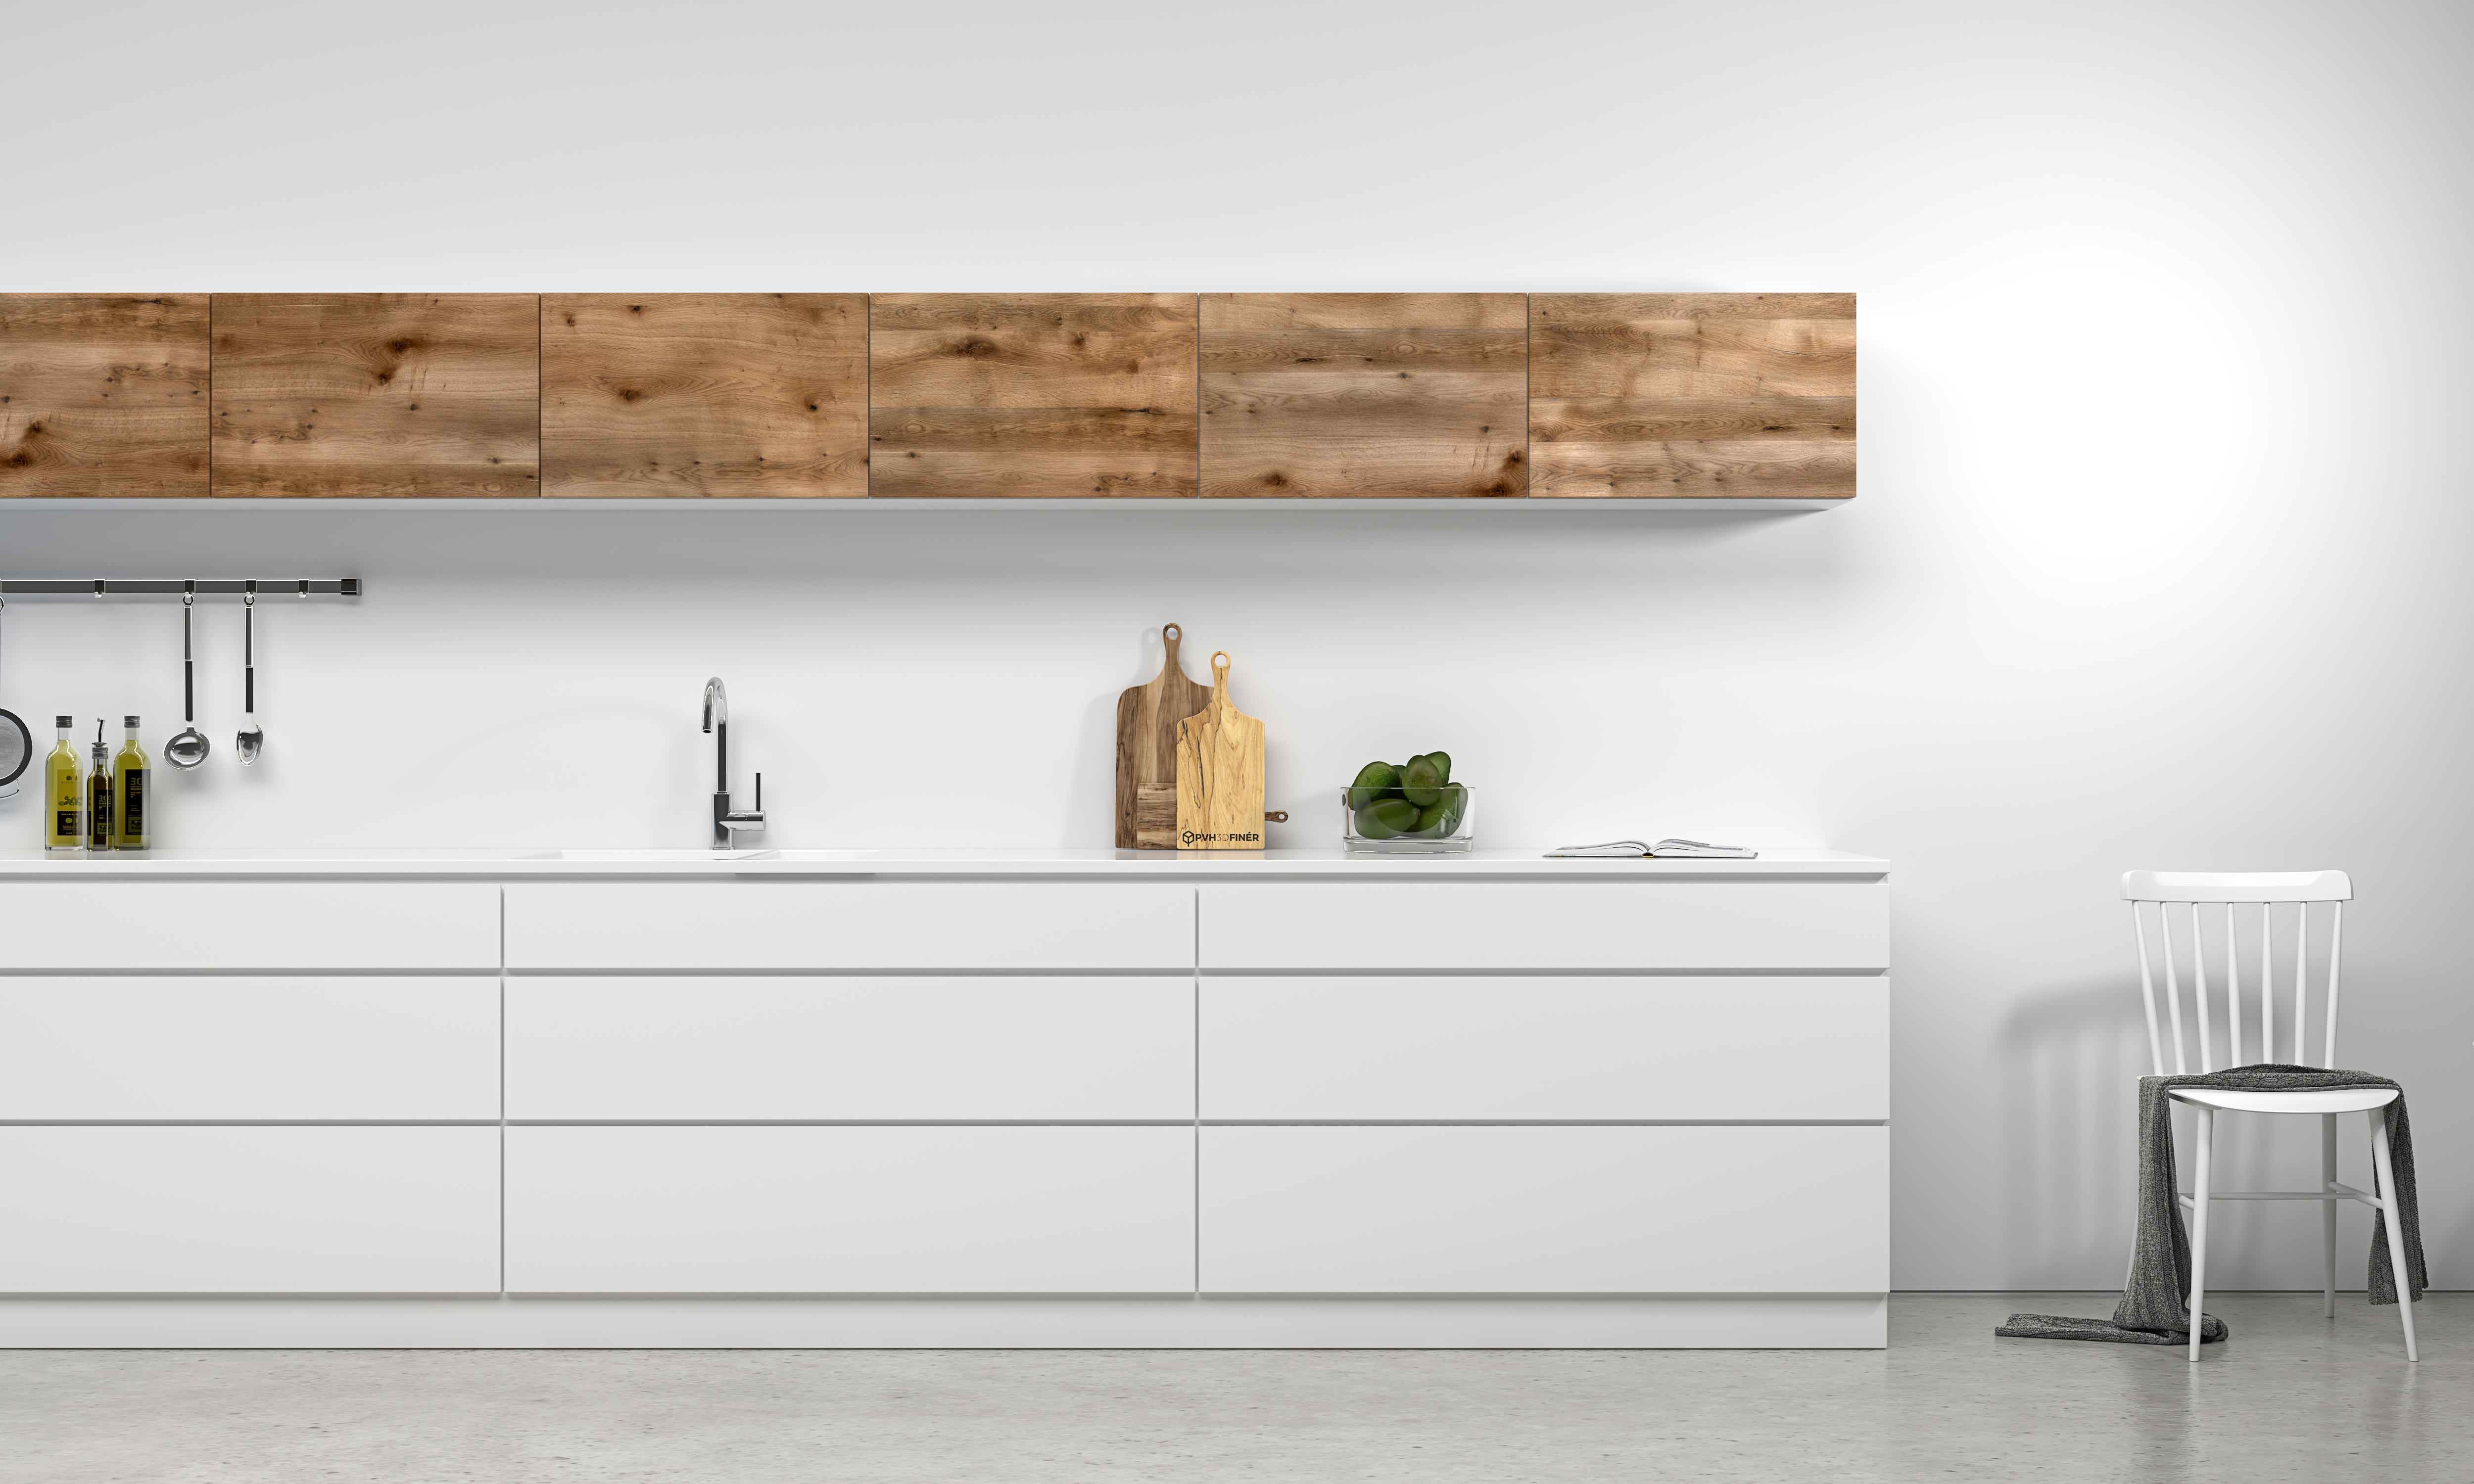 Barnwood - Brown Oak used for kitchen fronts which creates a beautiful contrast to the modern white